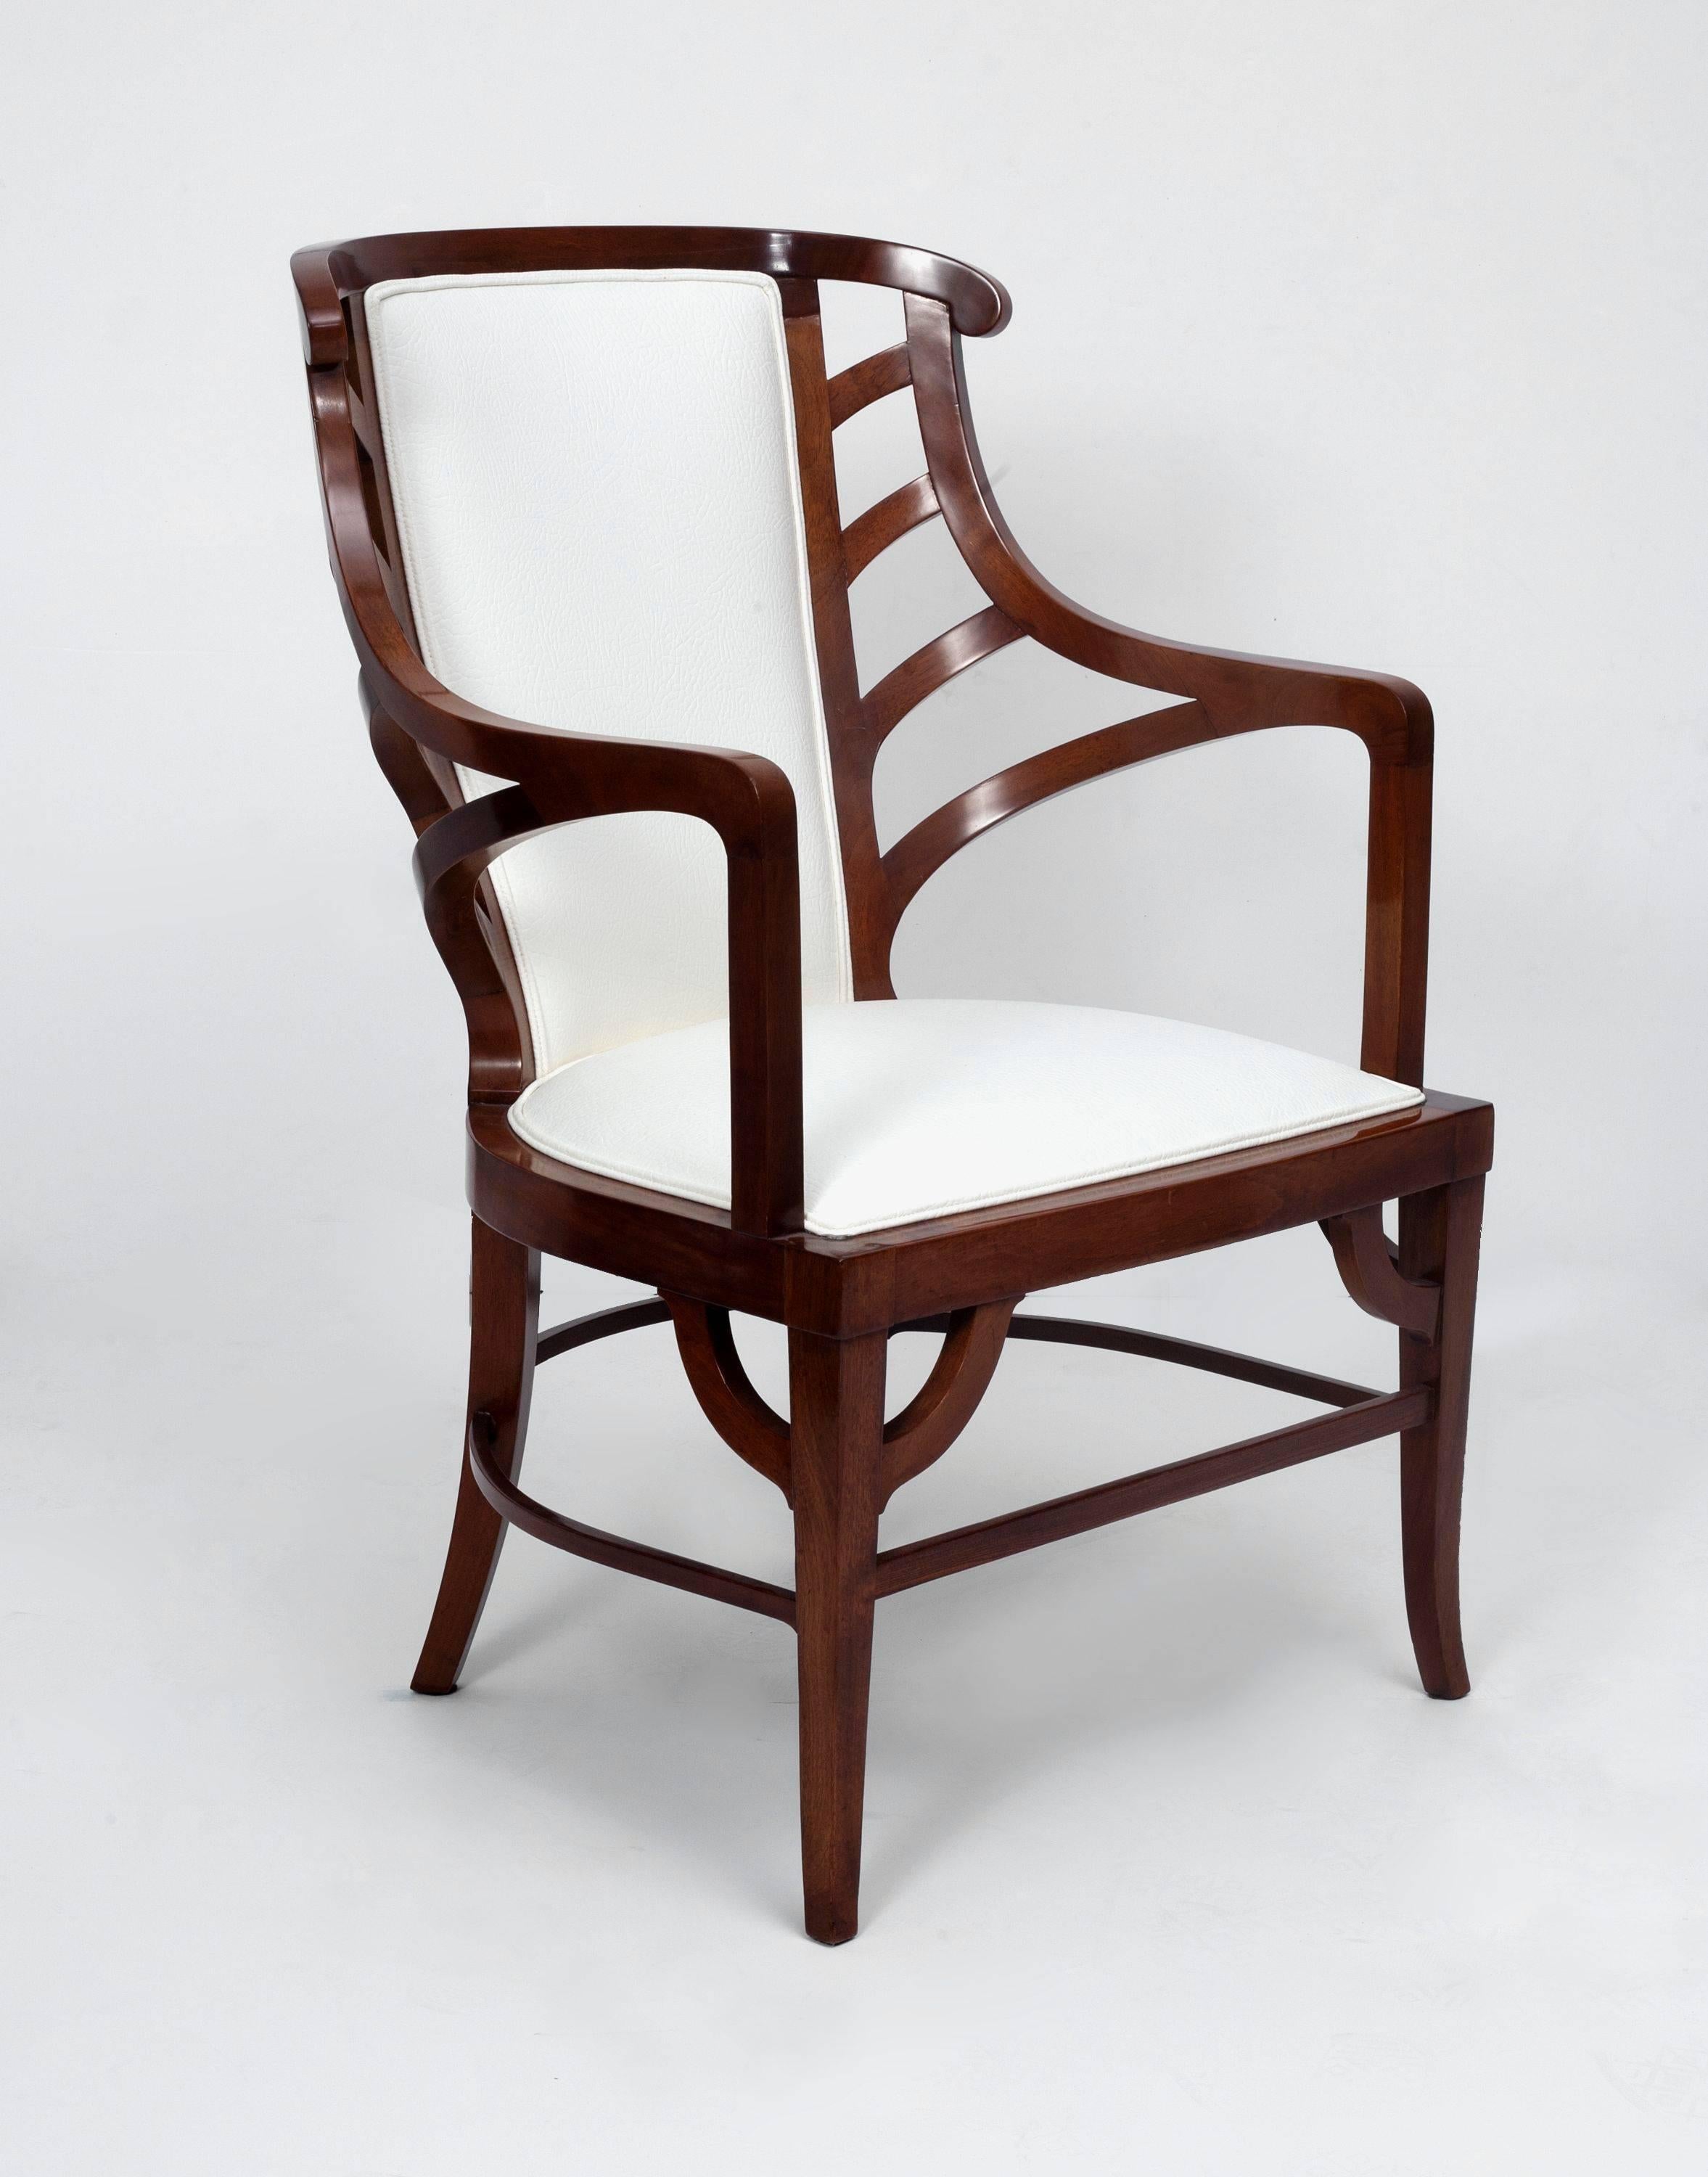 Art Nouveau armchair in walnut and white leather, in the manner of Henri van de Velde.